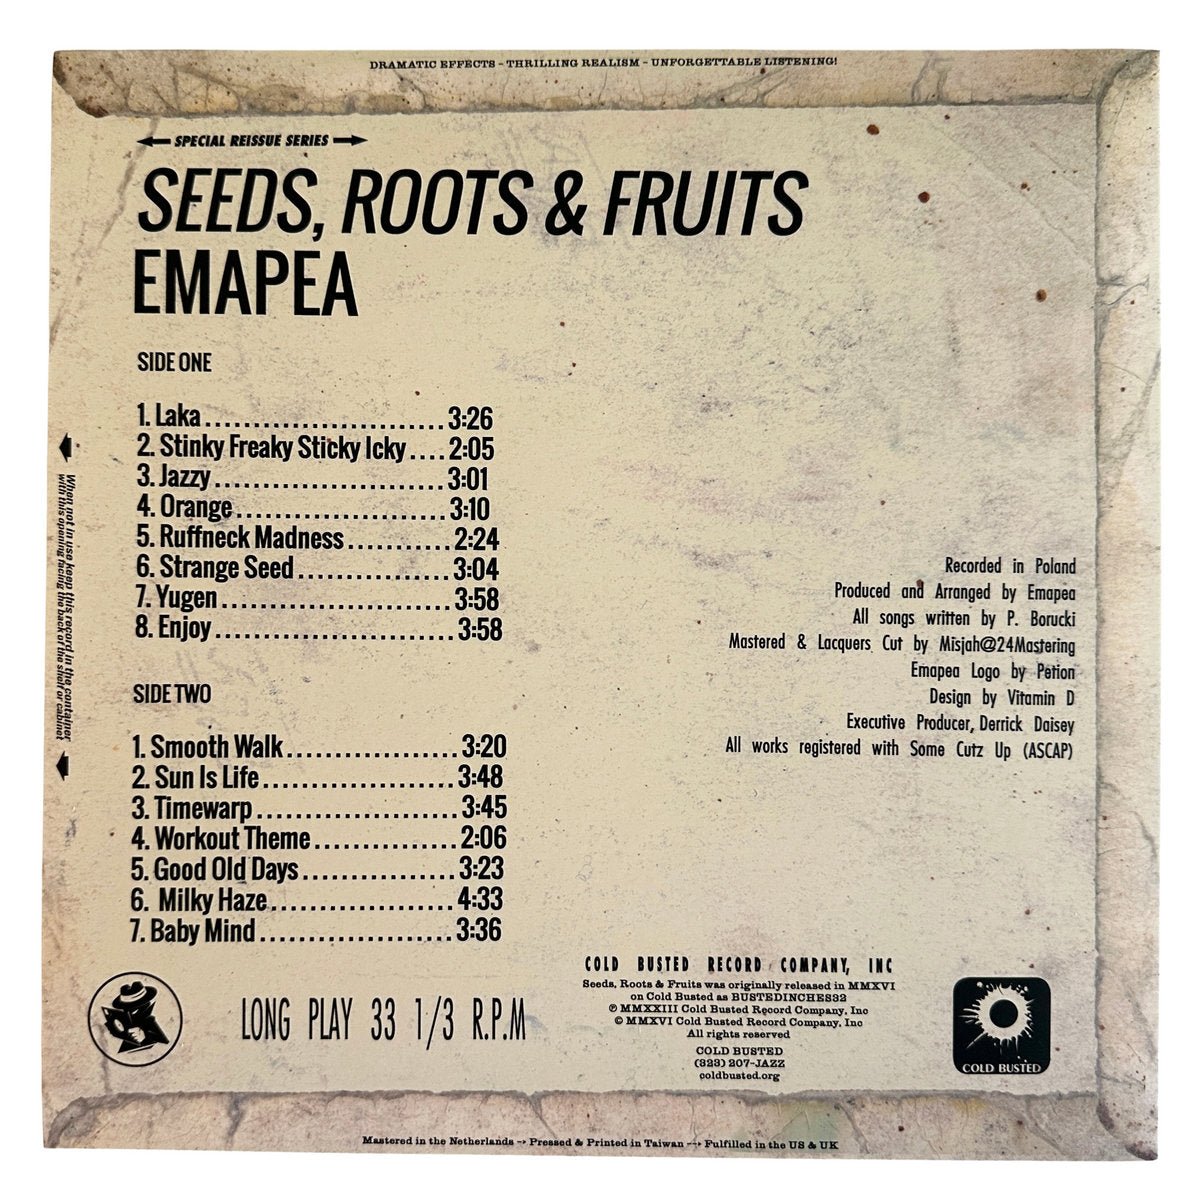 Emapea - Seeds, Roots & Fruits - Special Reissue Series 12 Inch Vinyl - COLD BUSTED